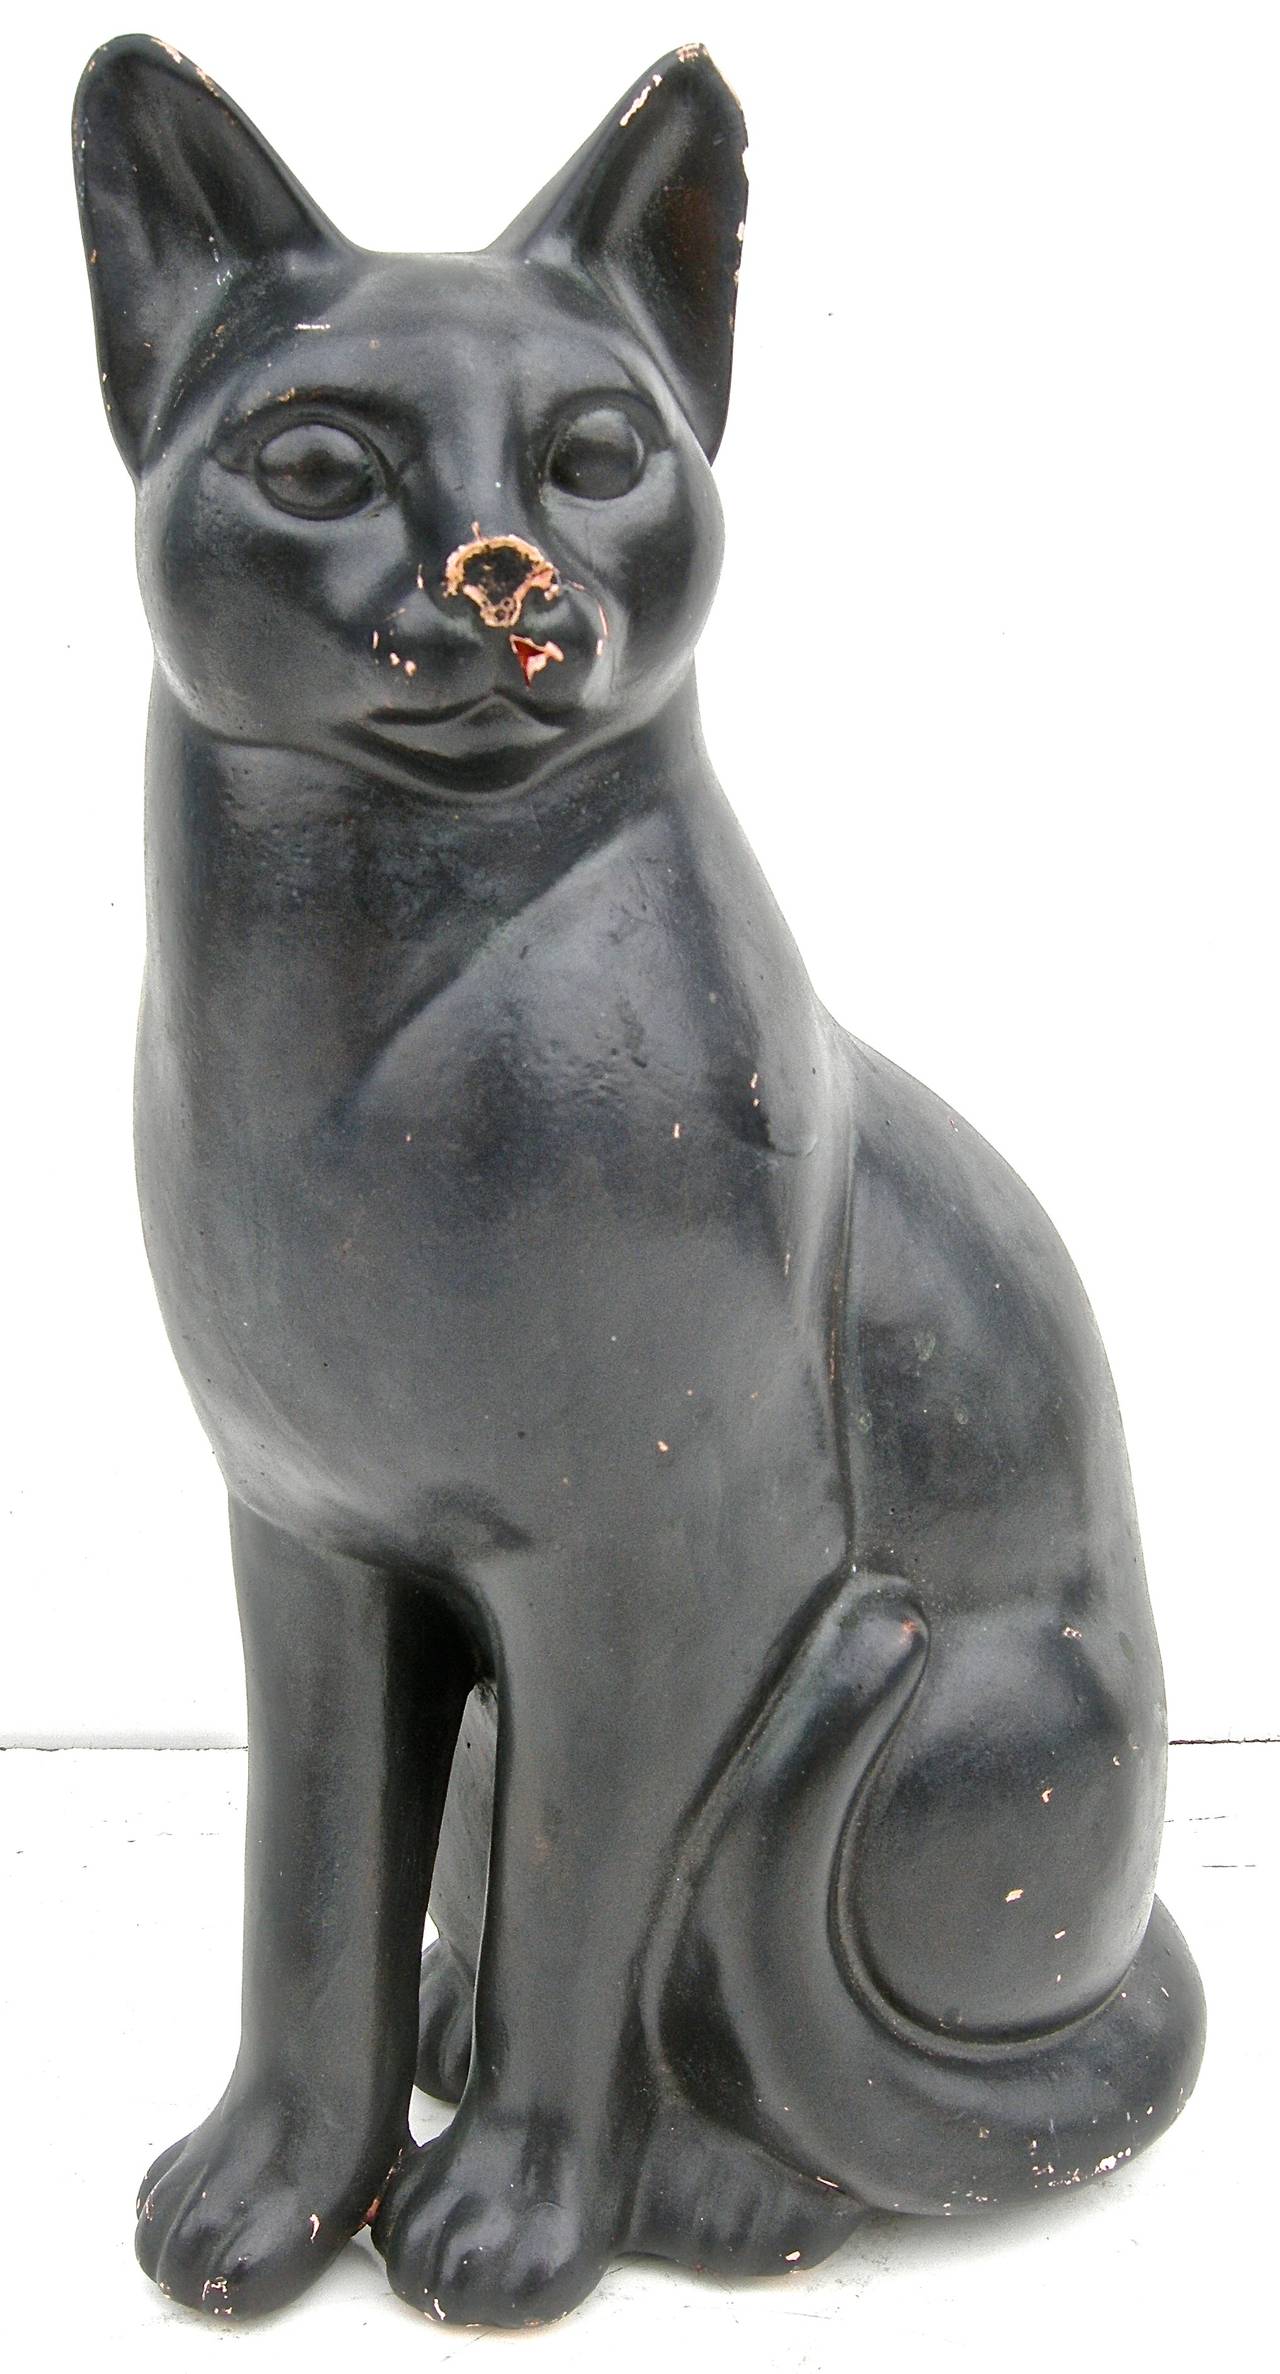 A terrific, Folk Art style, vintage terra cotta black cat. Having and amusing, whimsical a highly intriguing personality and demeanor. Time worn, scattered wear and distress.